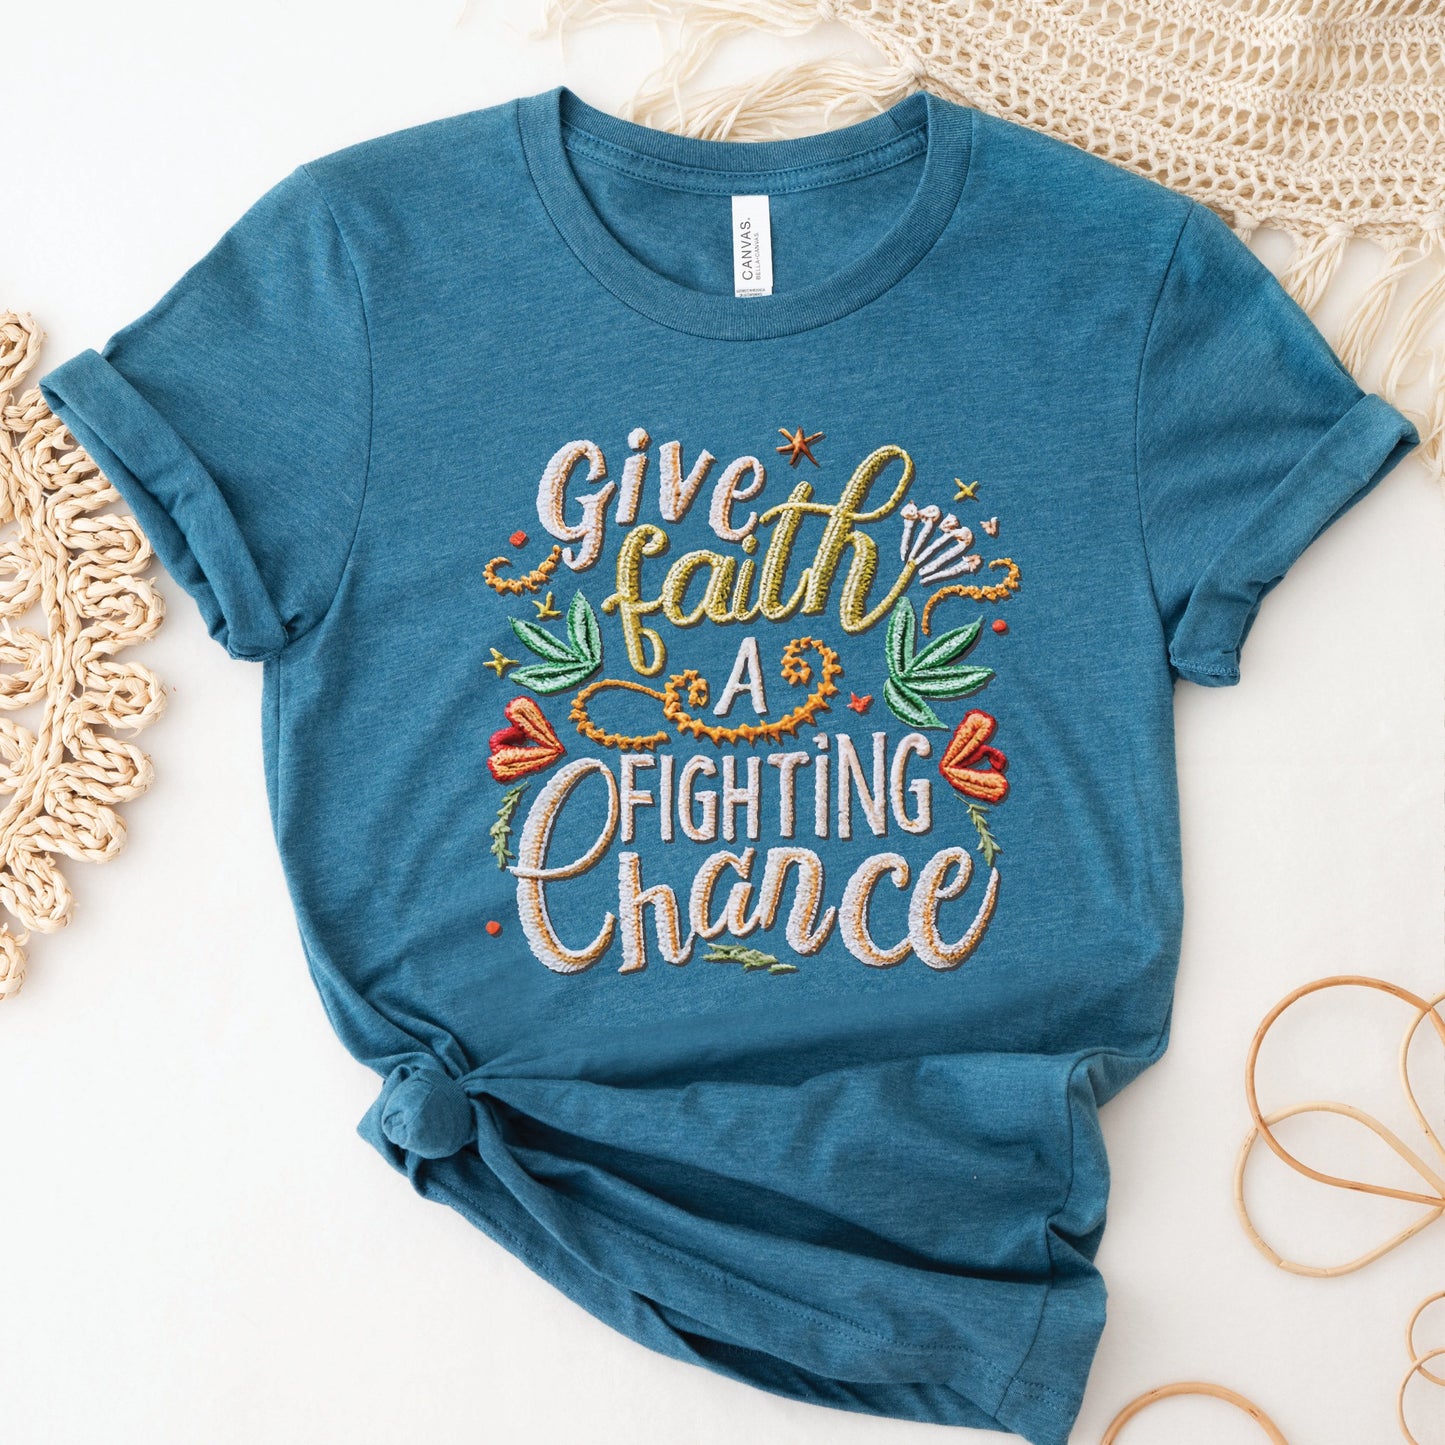 Heather deep teal soft t-shirt with printed embroidery font Christian Bible verse quote that says, "Give Faith A Fighting Chance" with flower and leaf graphics, faith-based t-shirt designed for women